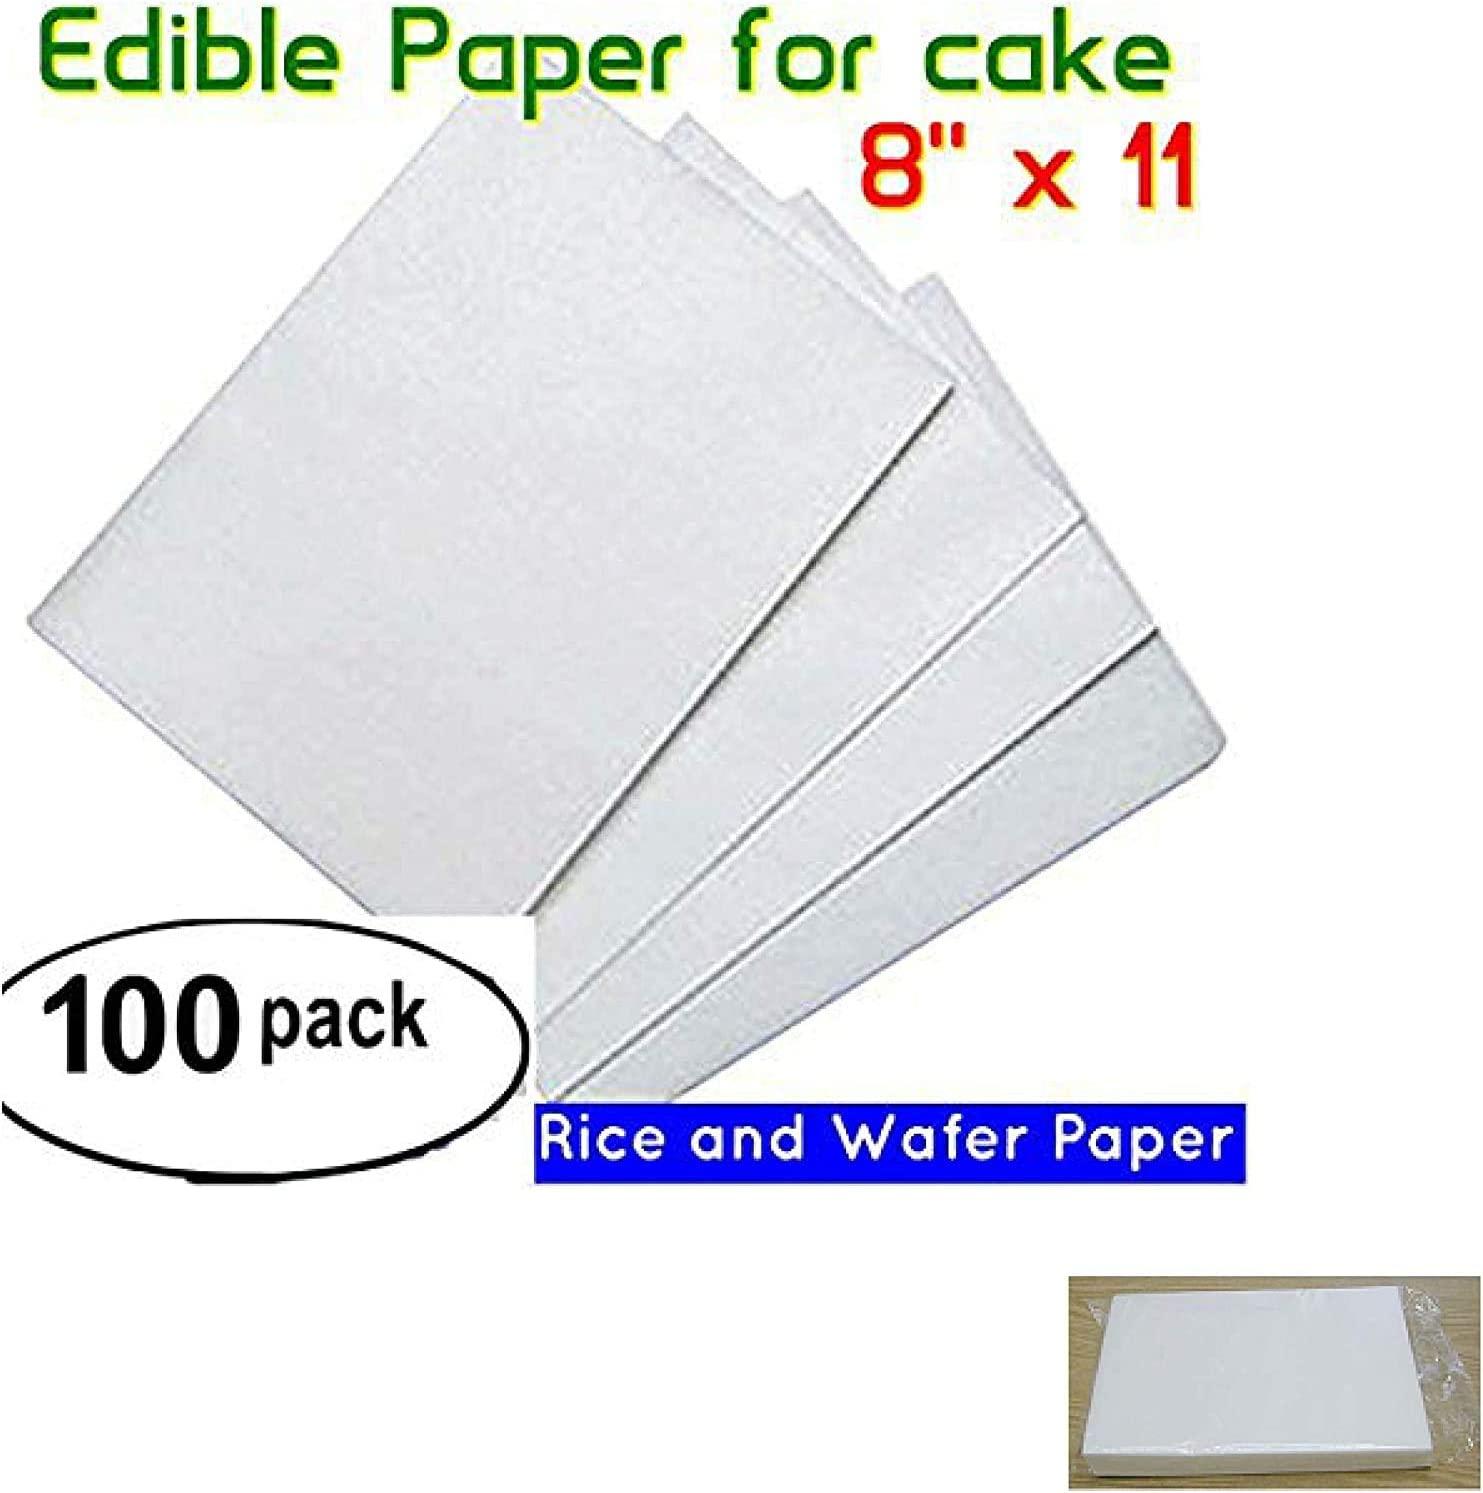 Edible Inks Papers For Cakes etc Kenya